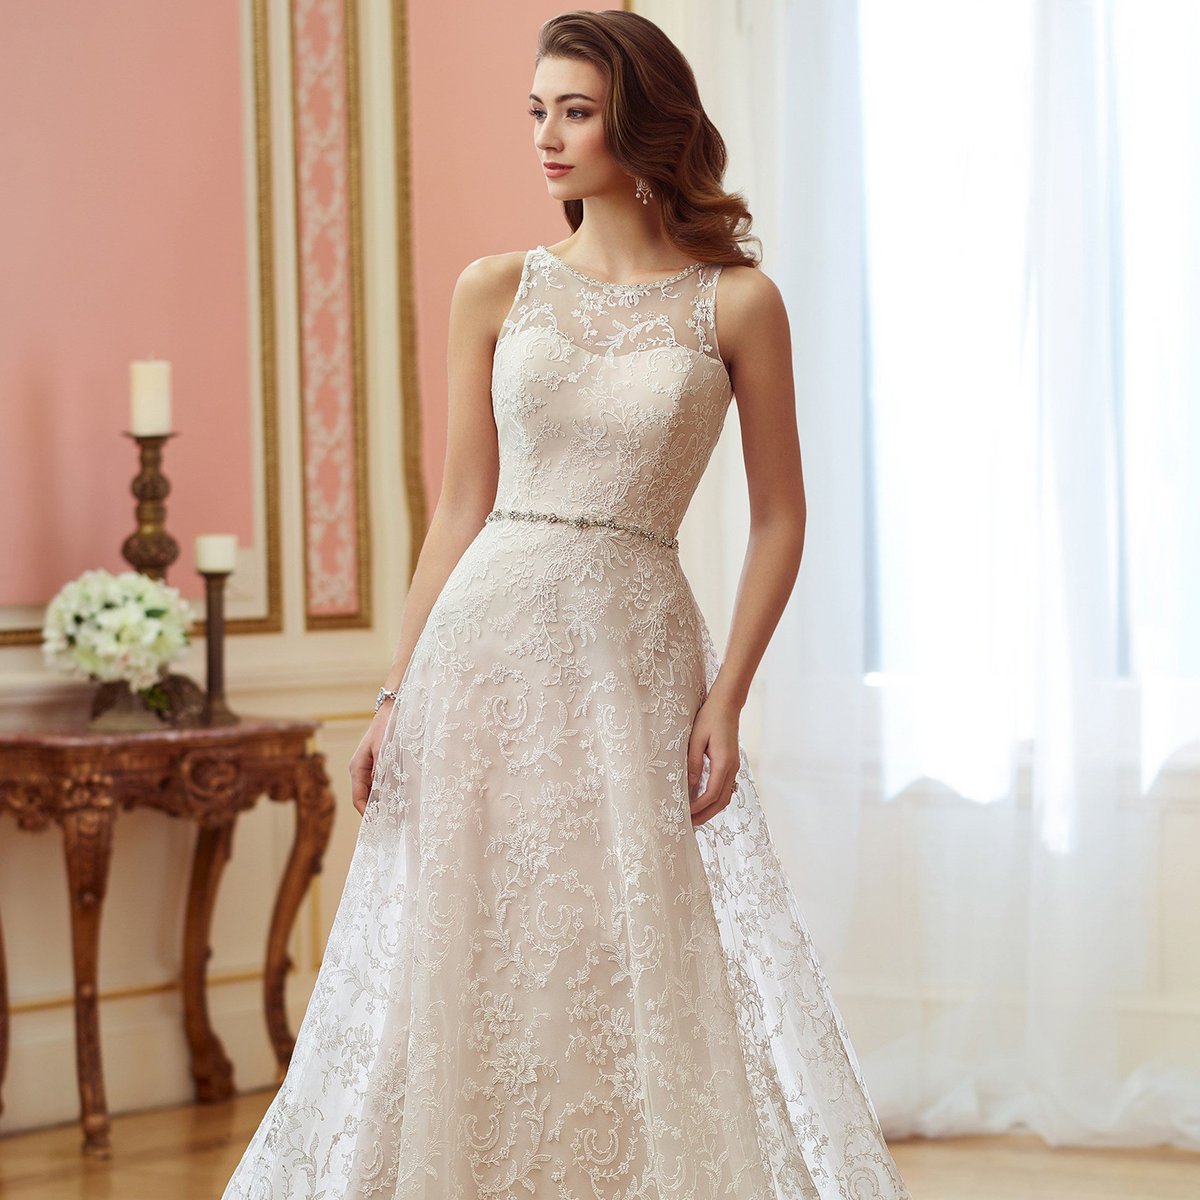 Wedding dress for your beautiful day!